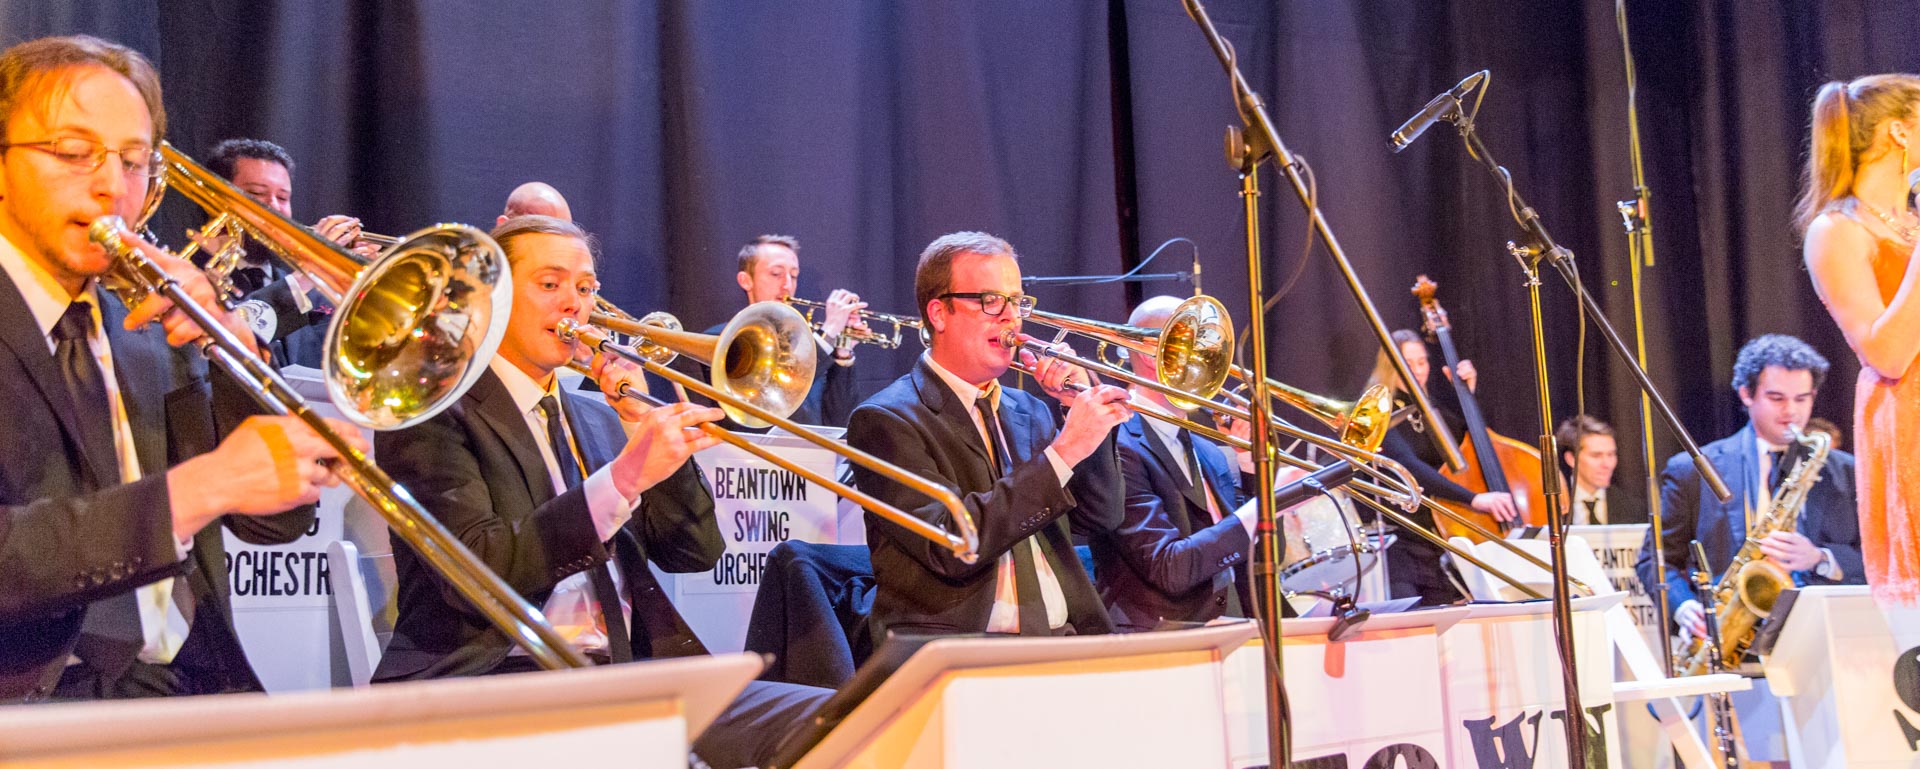 Beantown Swing Orchestra